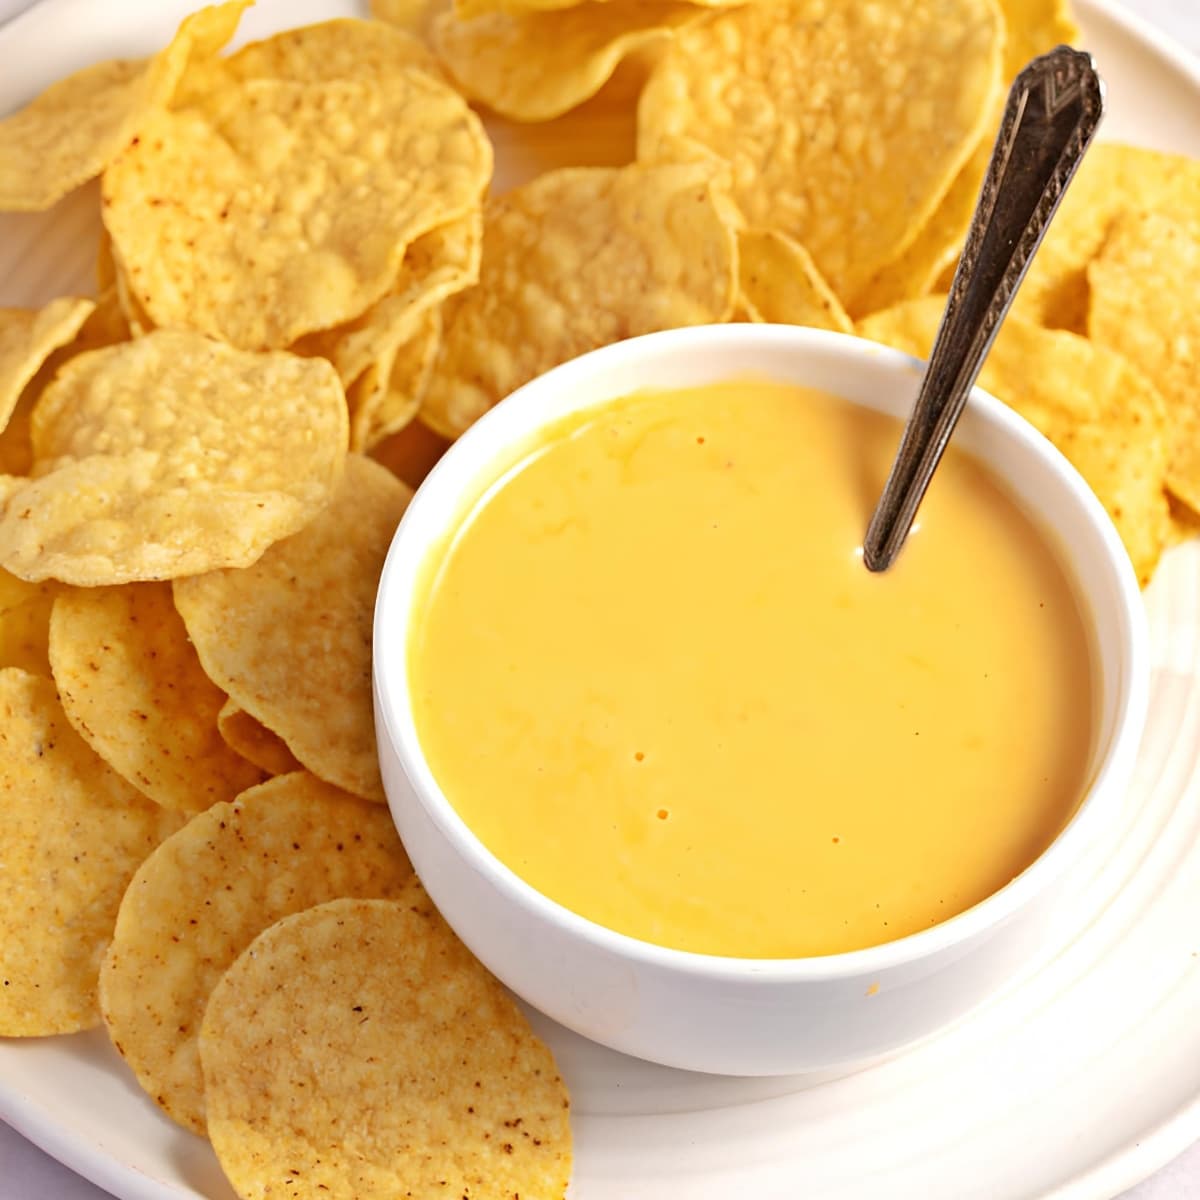 Homemade Creamy Nacho Cheese Sauce Served with Chips